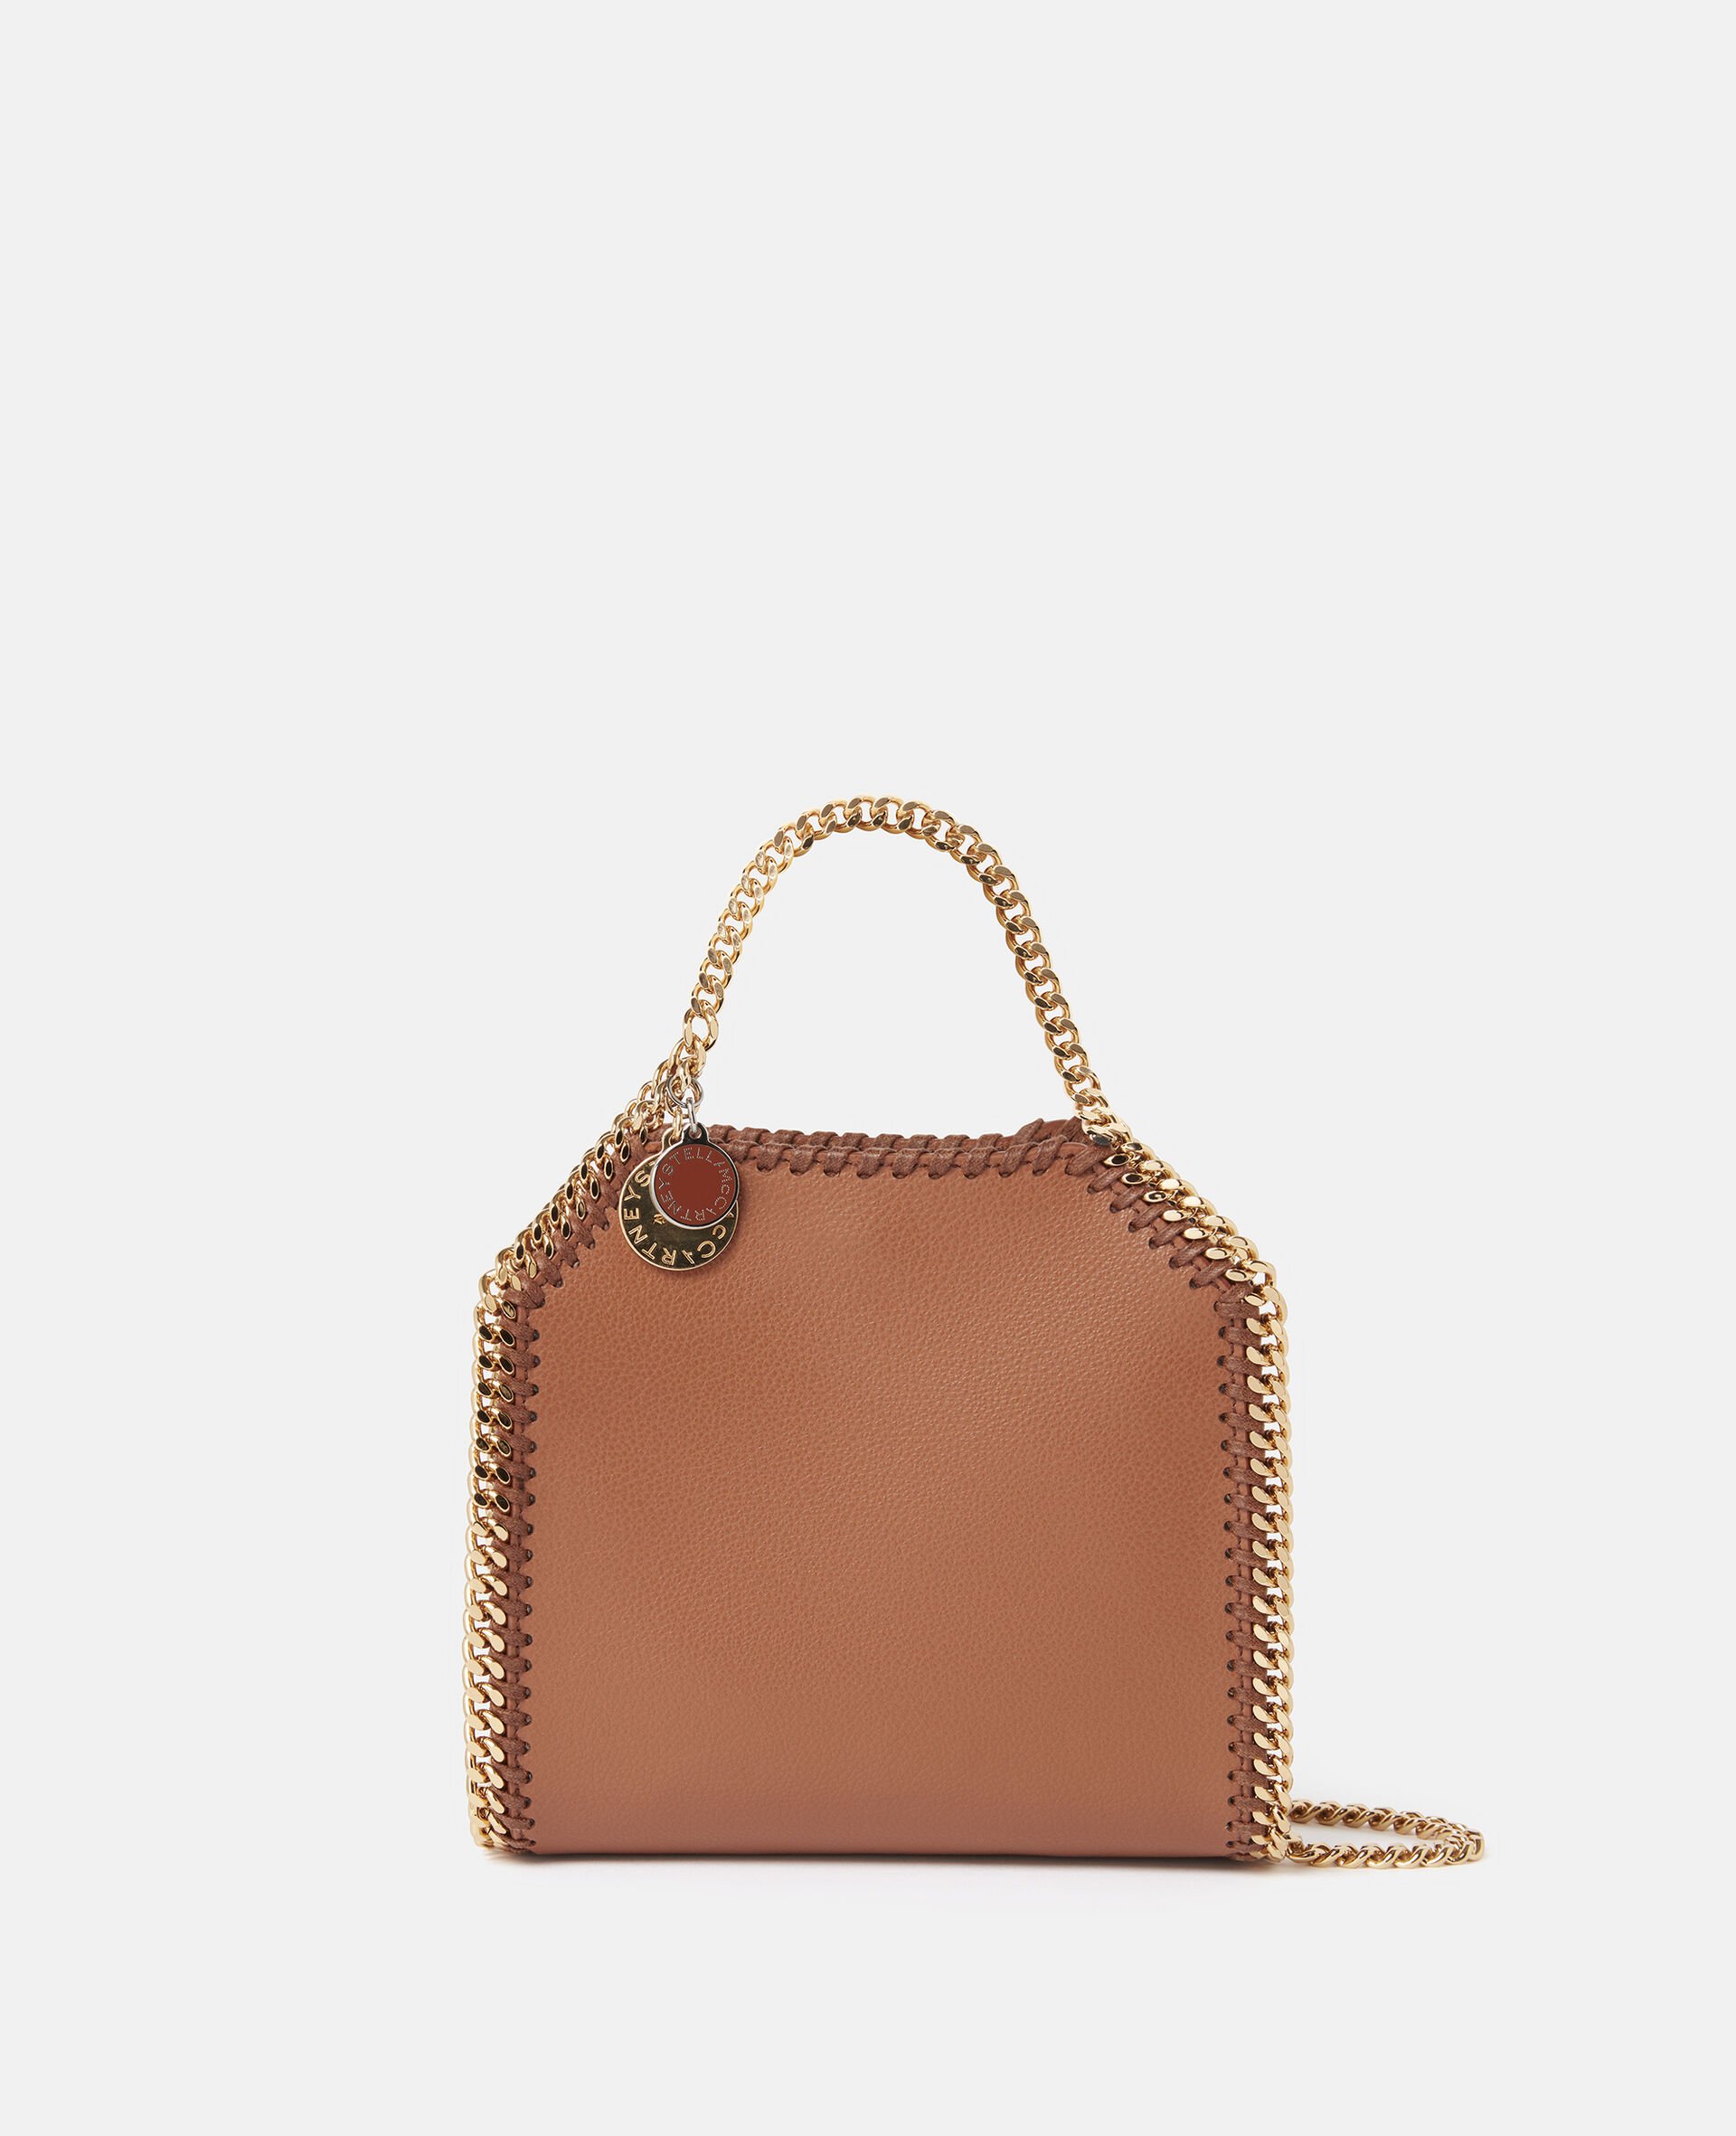 Stella McCartney Falabella in the Tiny Tote shape and size (one of our essentials) in the Brandy colorway